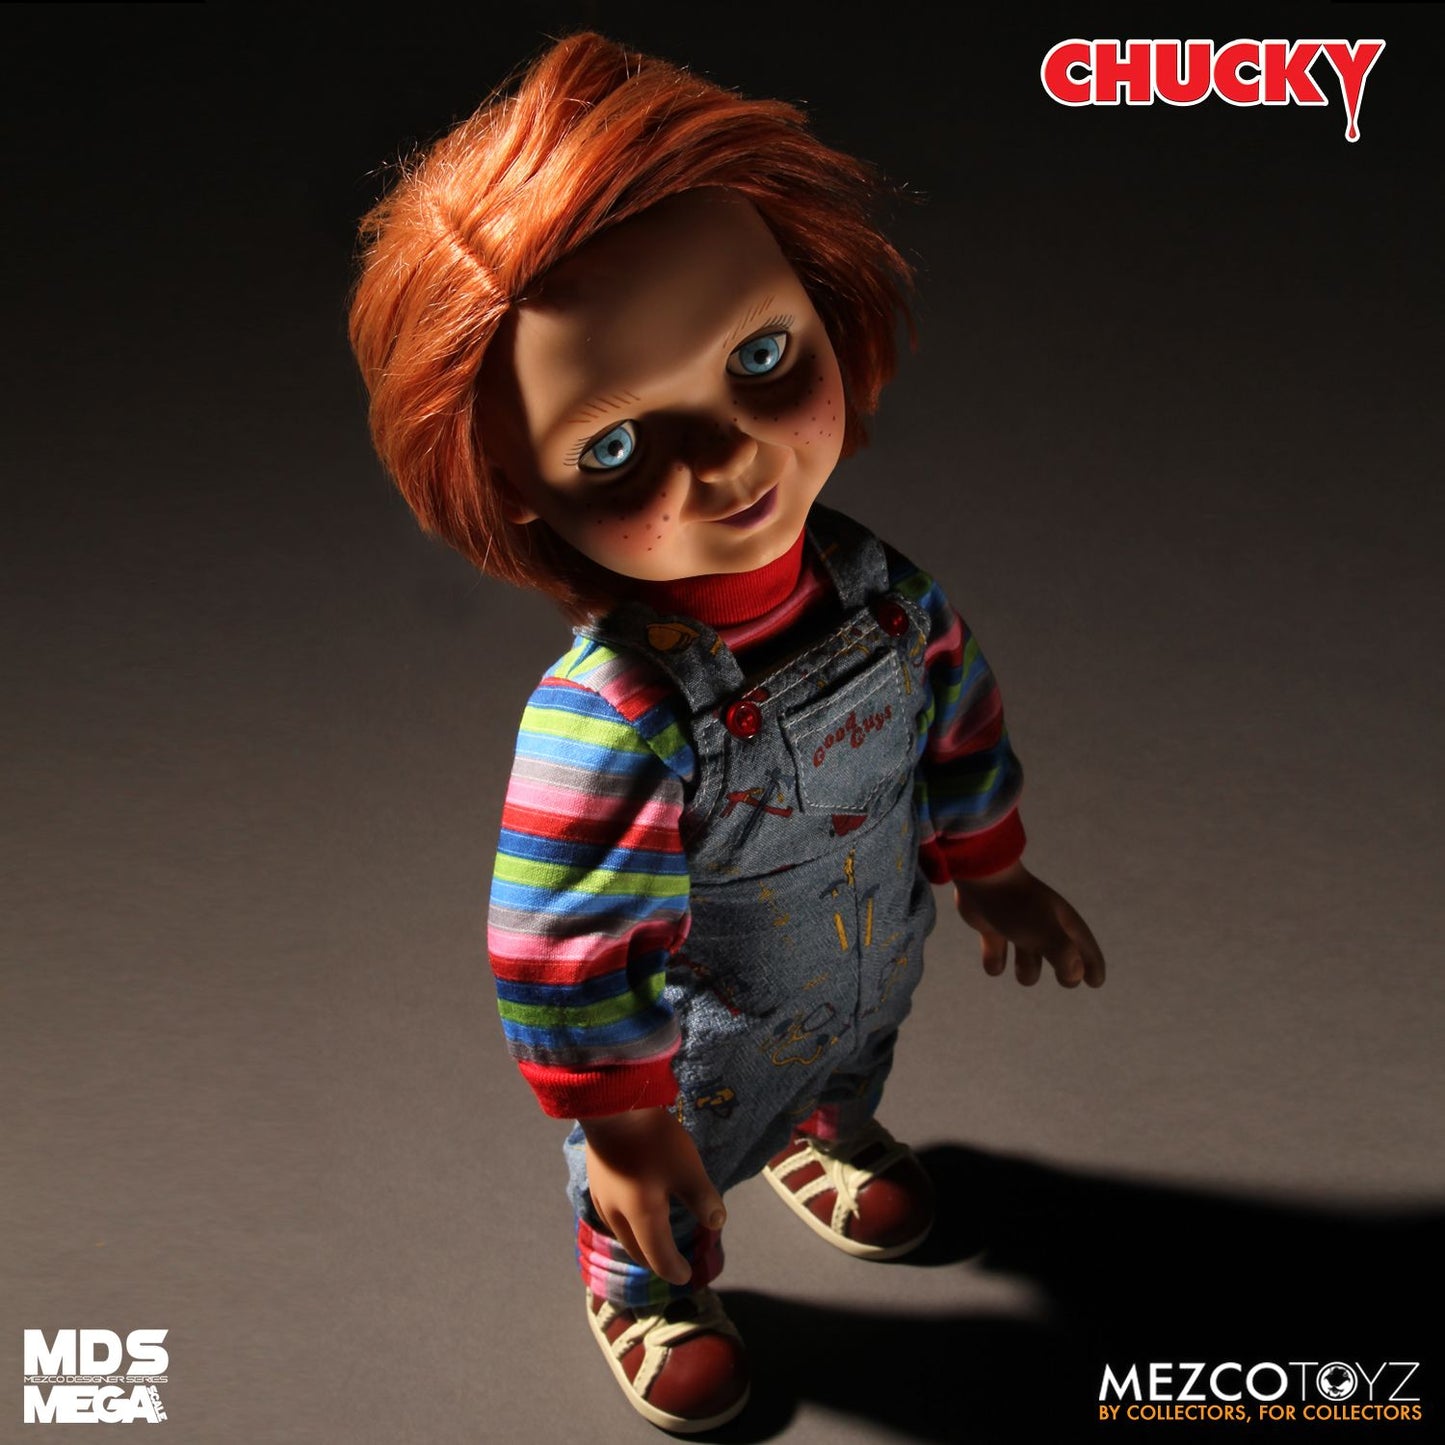 Chucky He wants you for a Best Friend